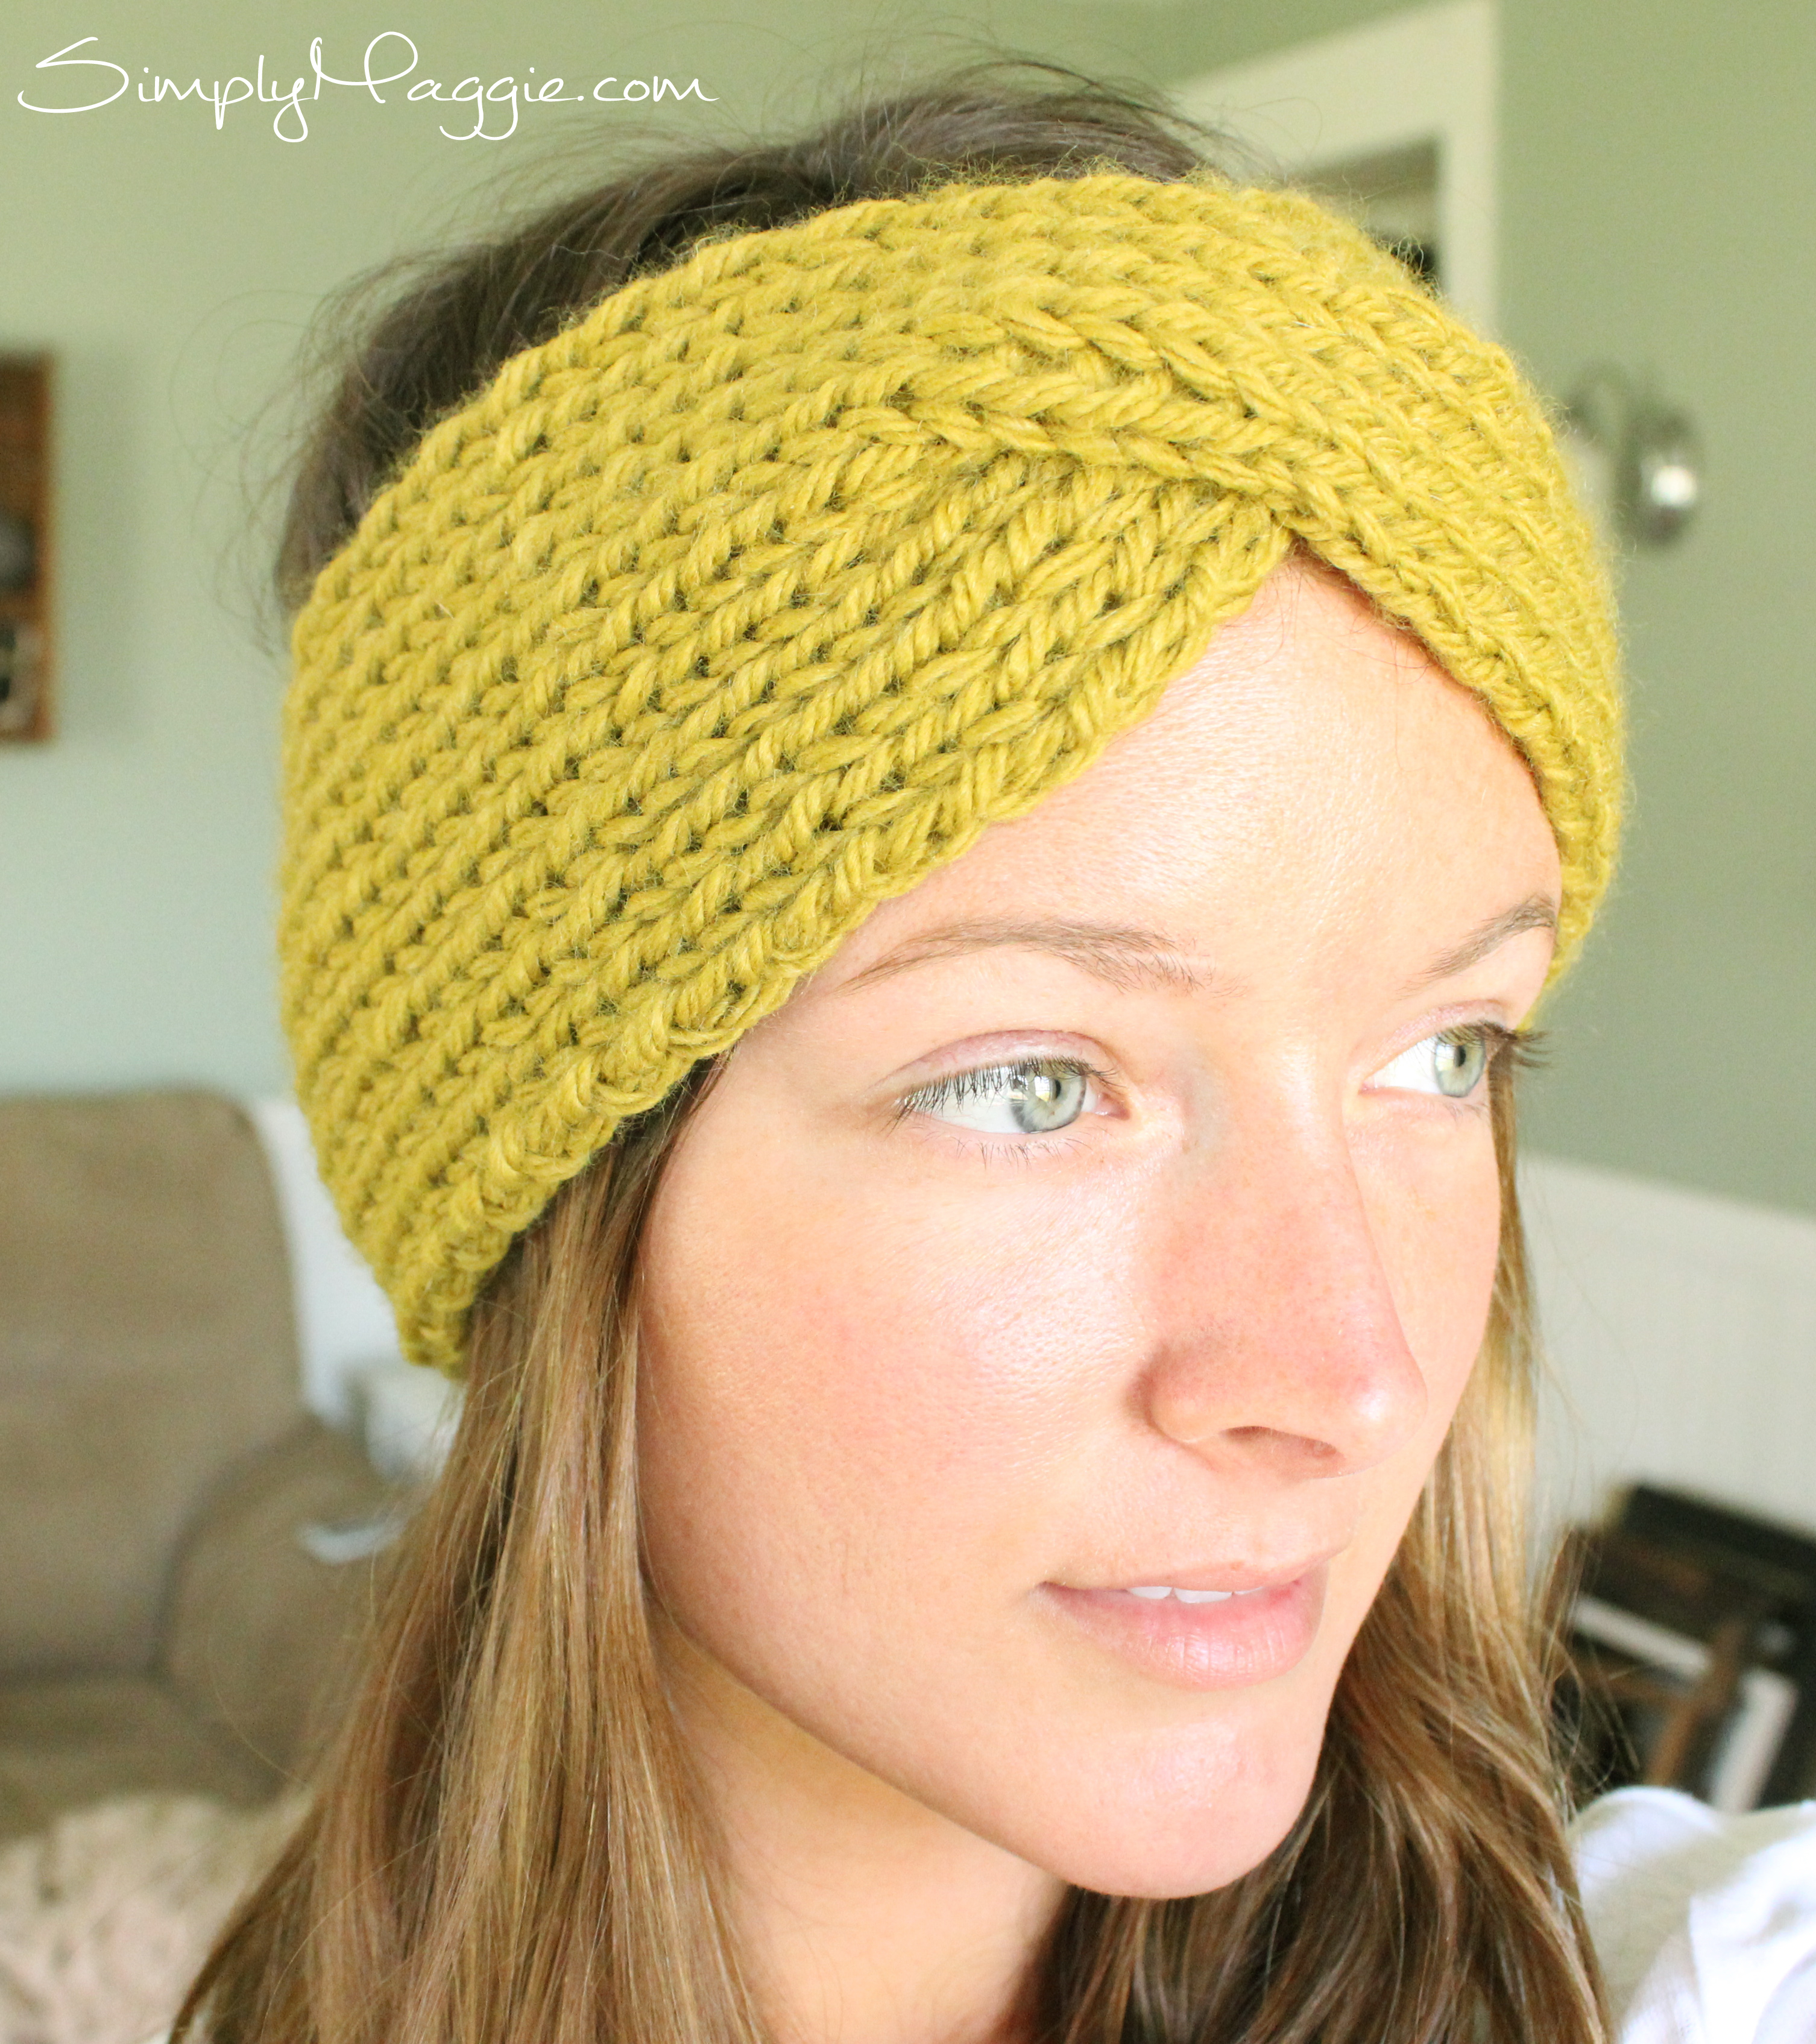 Knitted Headband Patterns With Flower Turban Style Knit Headband Simplymaggie